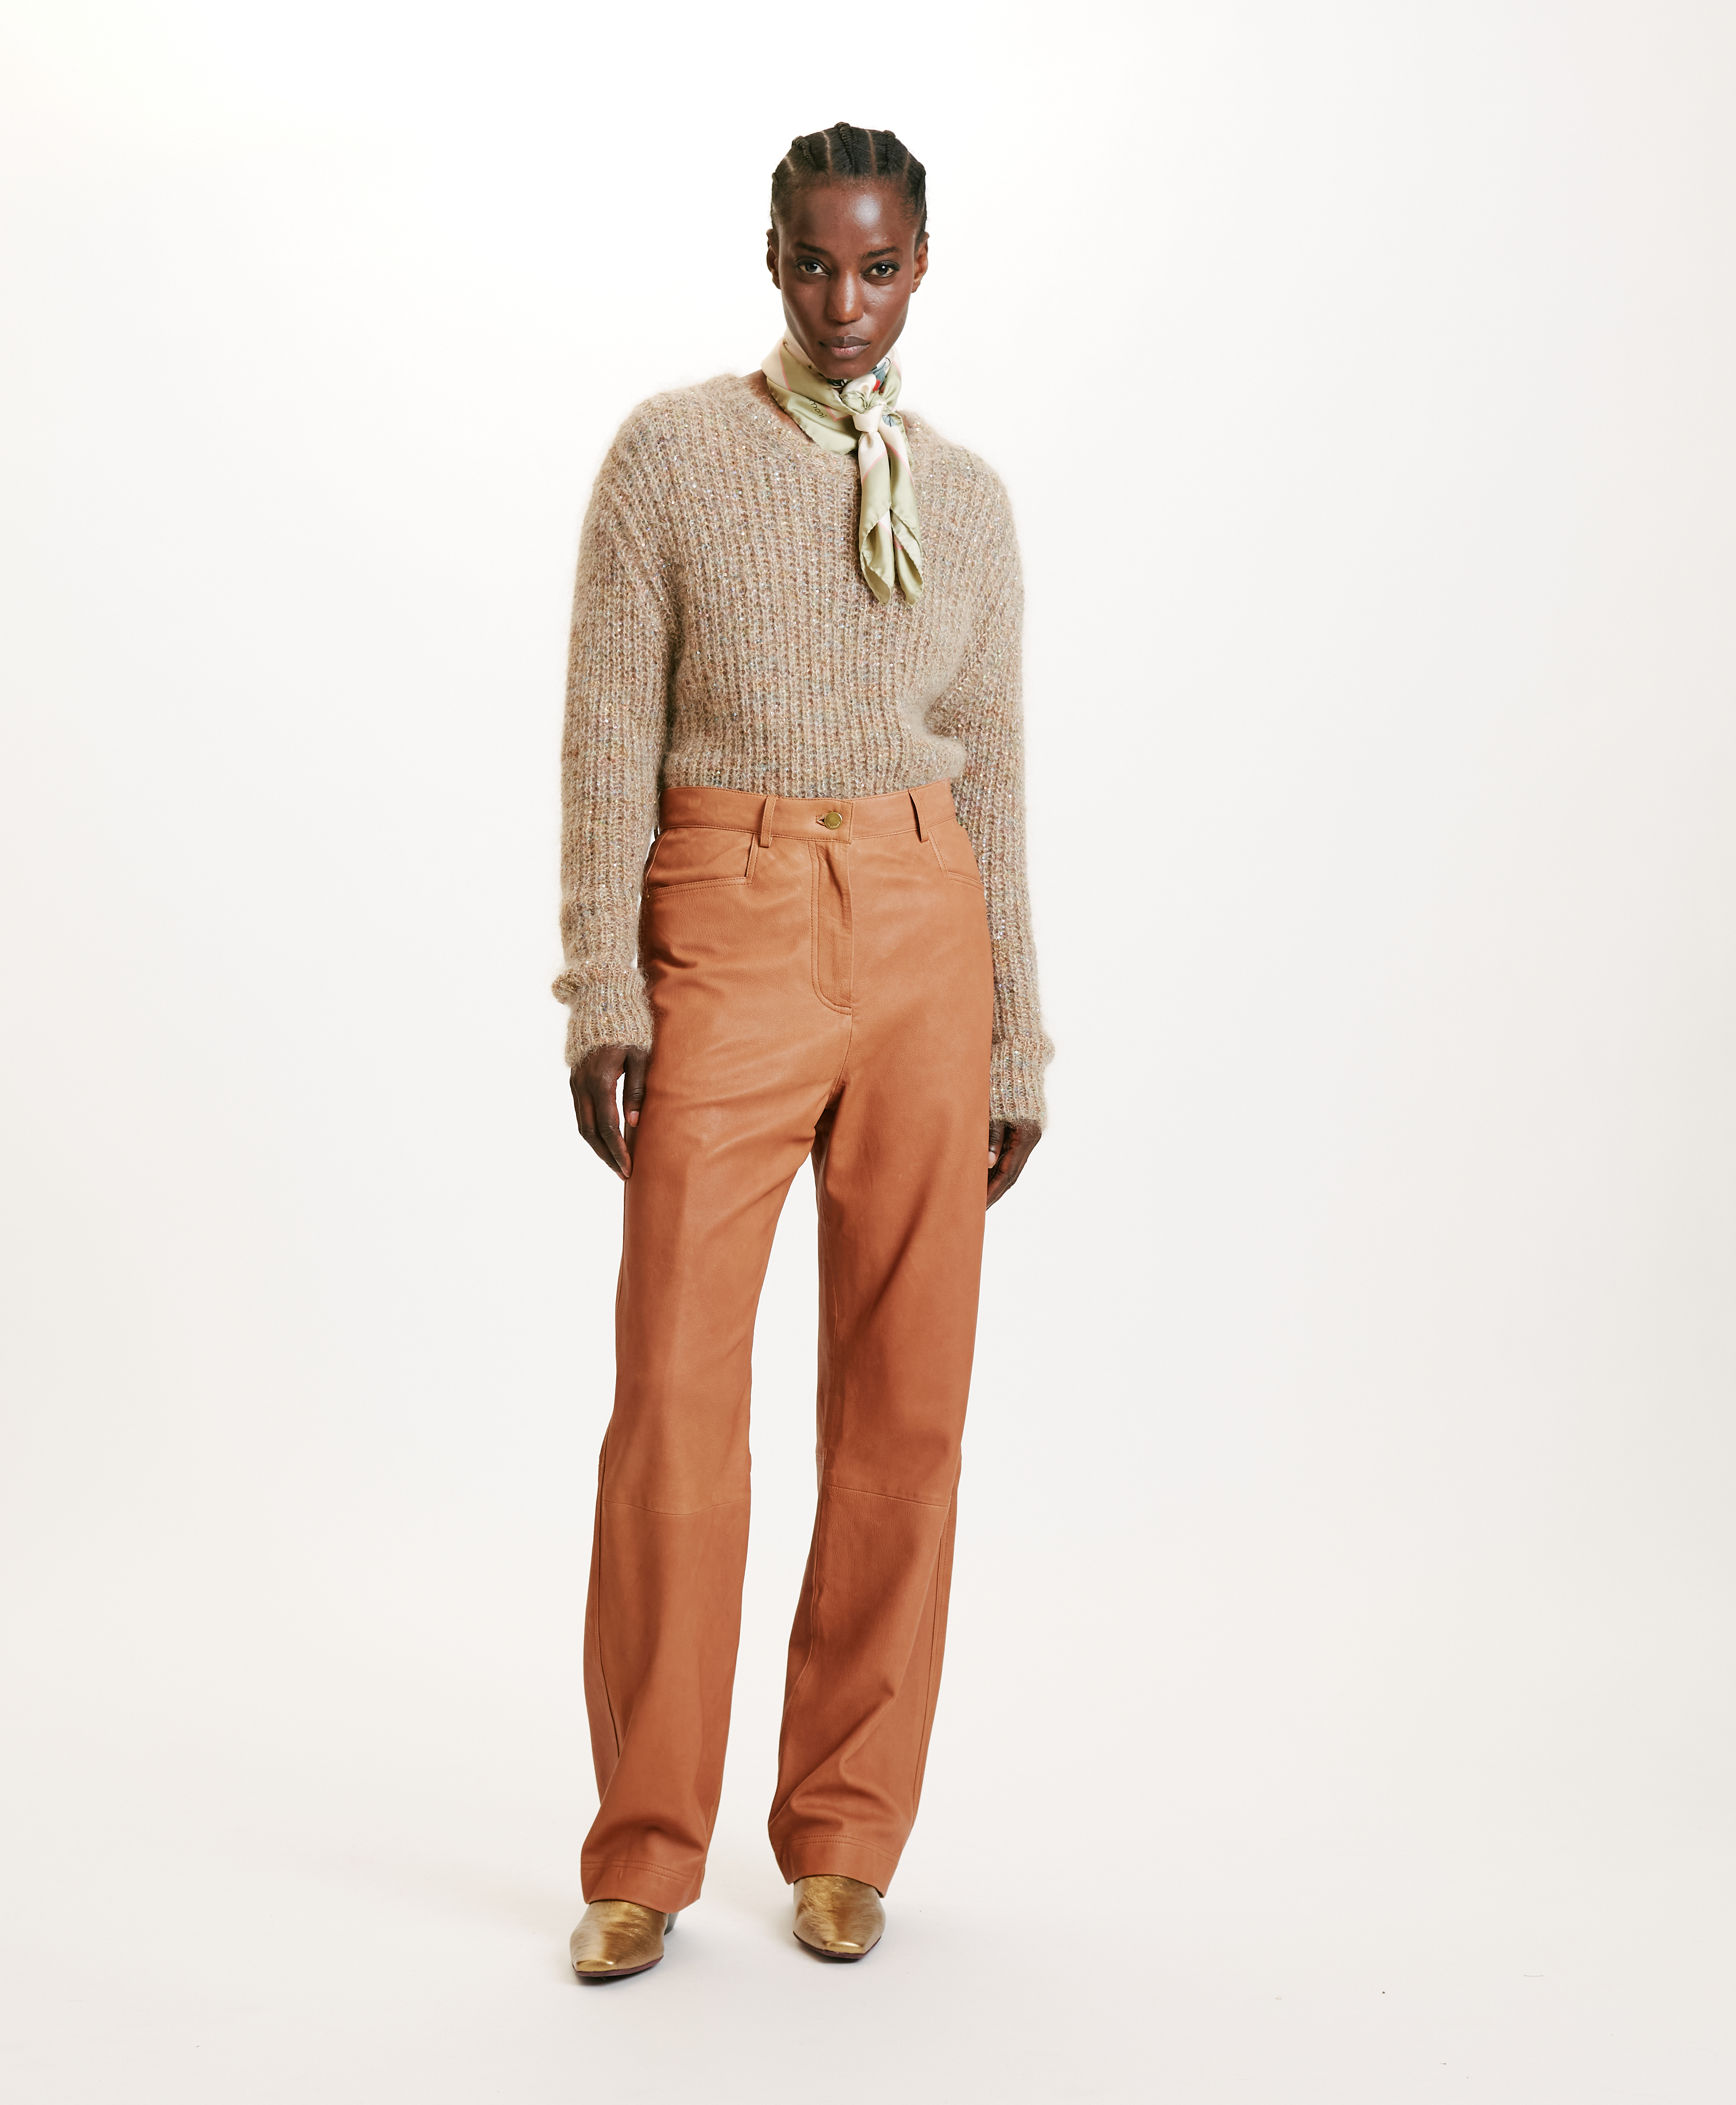 JACQUES PANTS IN NAPPA LEATHER - COGNAC - Momonì